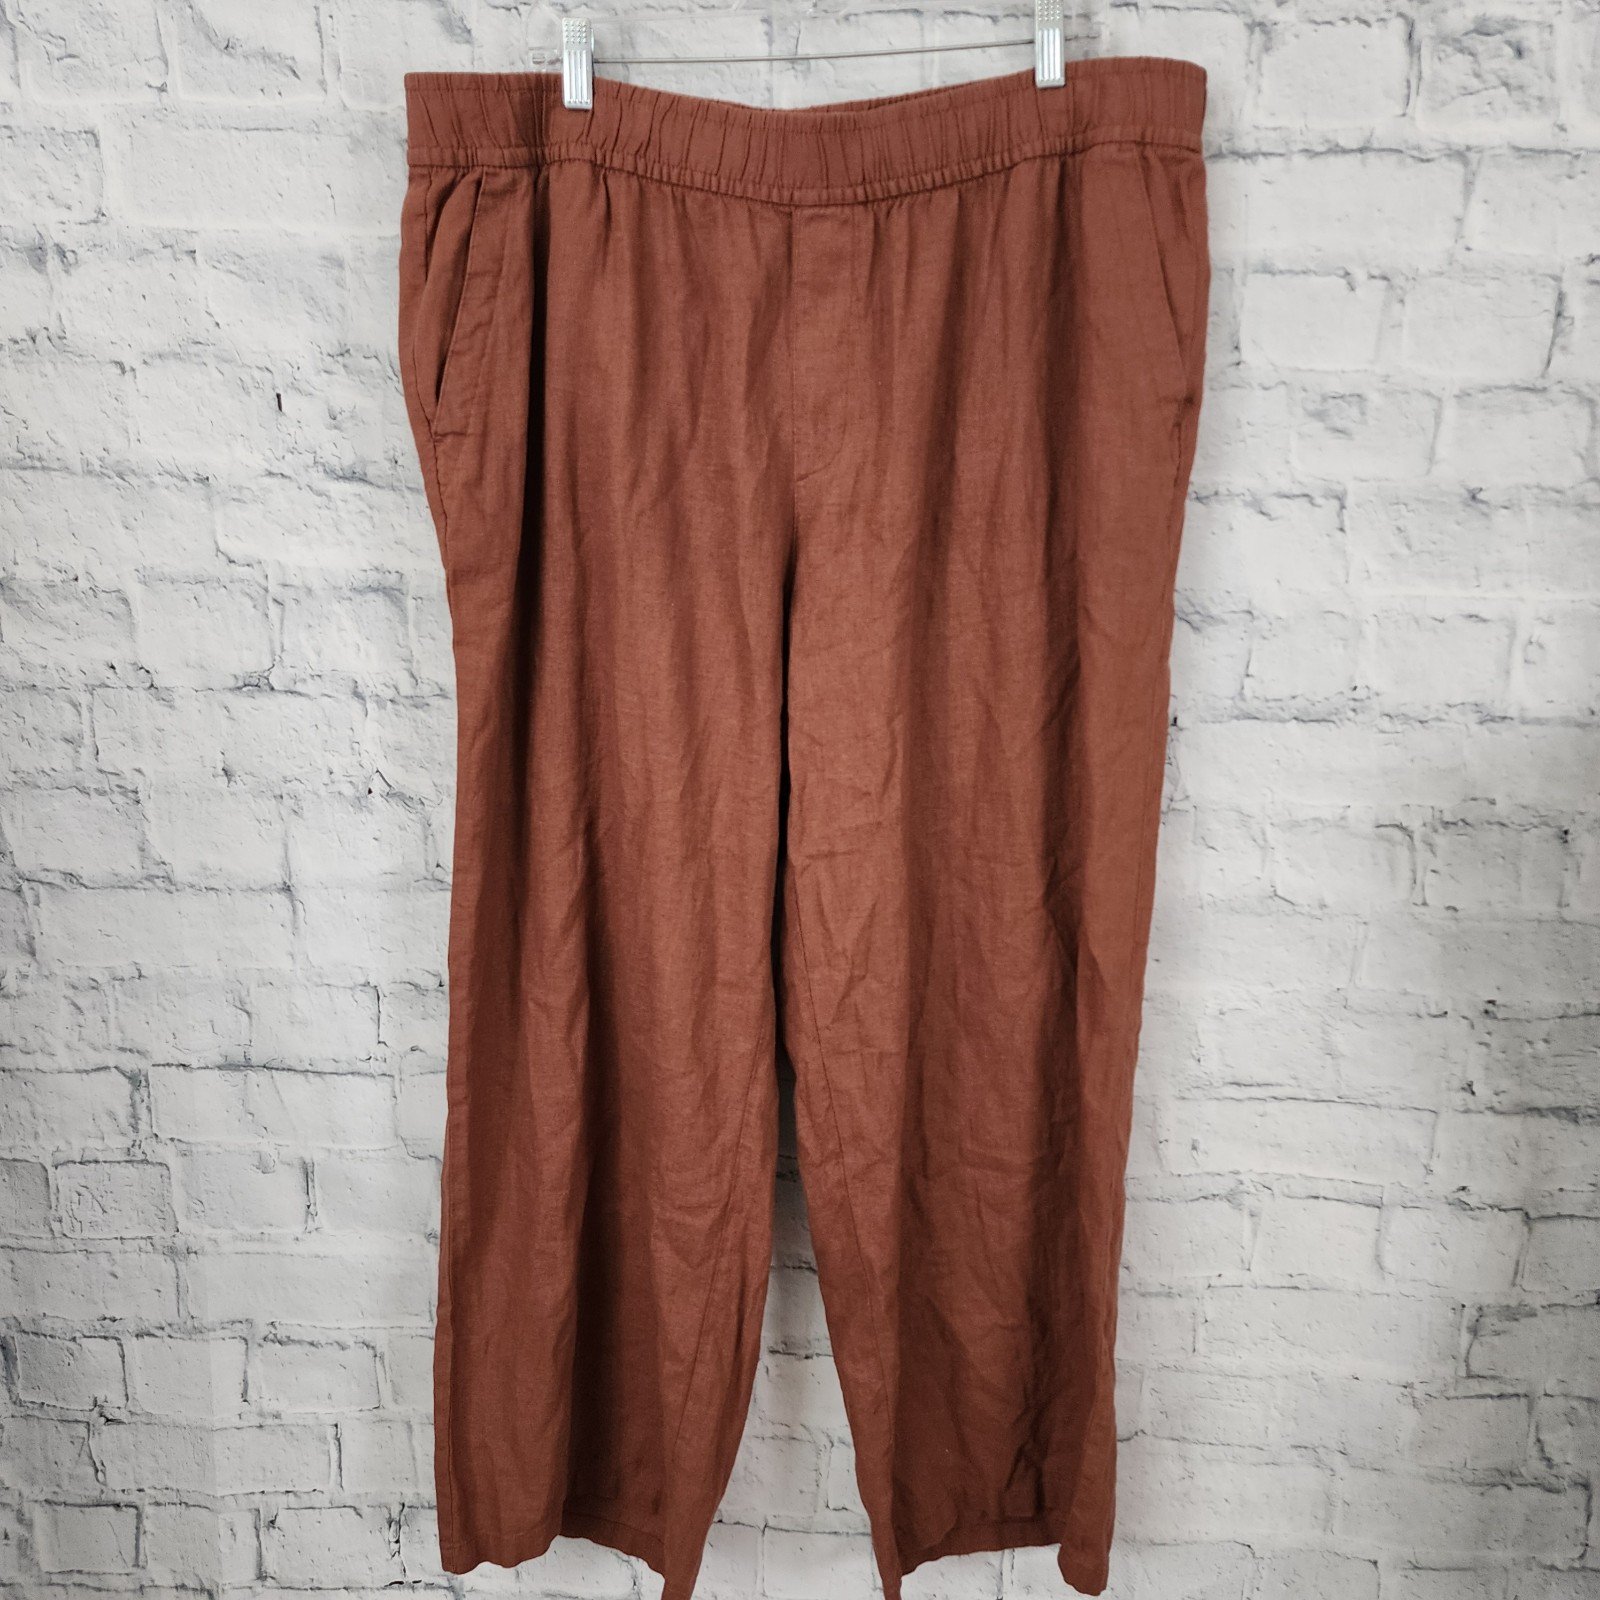 Discounted Old navy wide leg Pants Sz 2X brown pockets linen blend A41 kxyI5fakE for sale